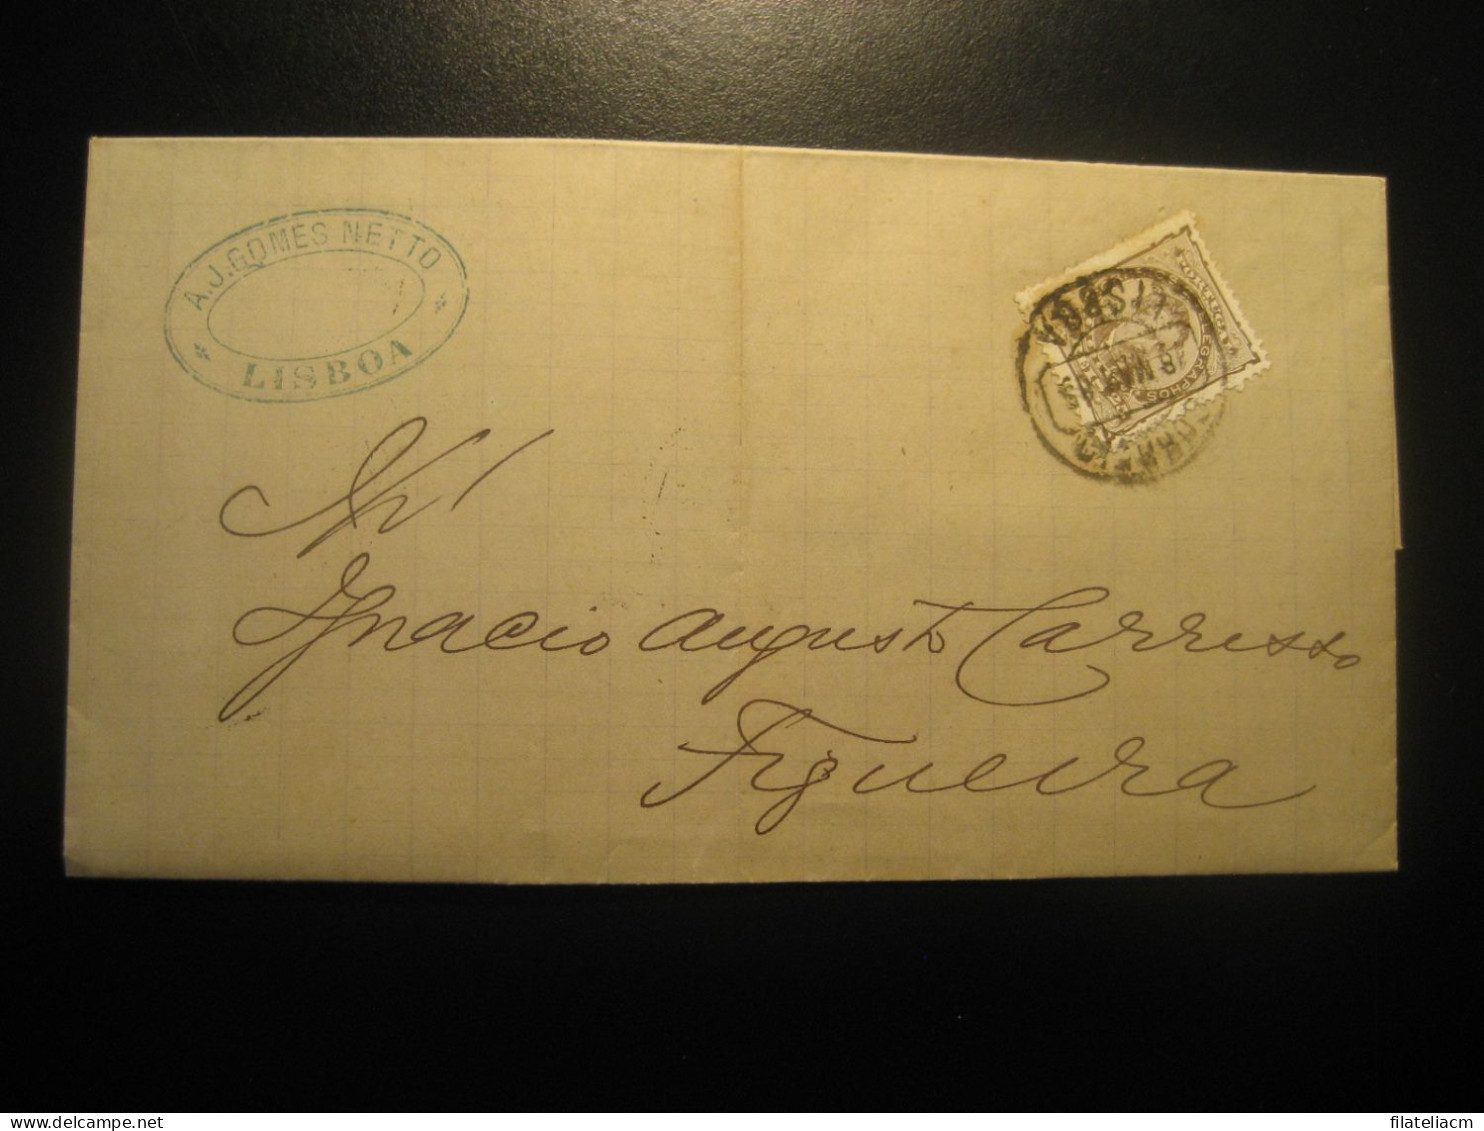 LISBOA 1885 To Figueira Cancel A.J. Gomes Netto Letter PORTUGAL - Covers & Documents